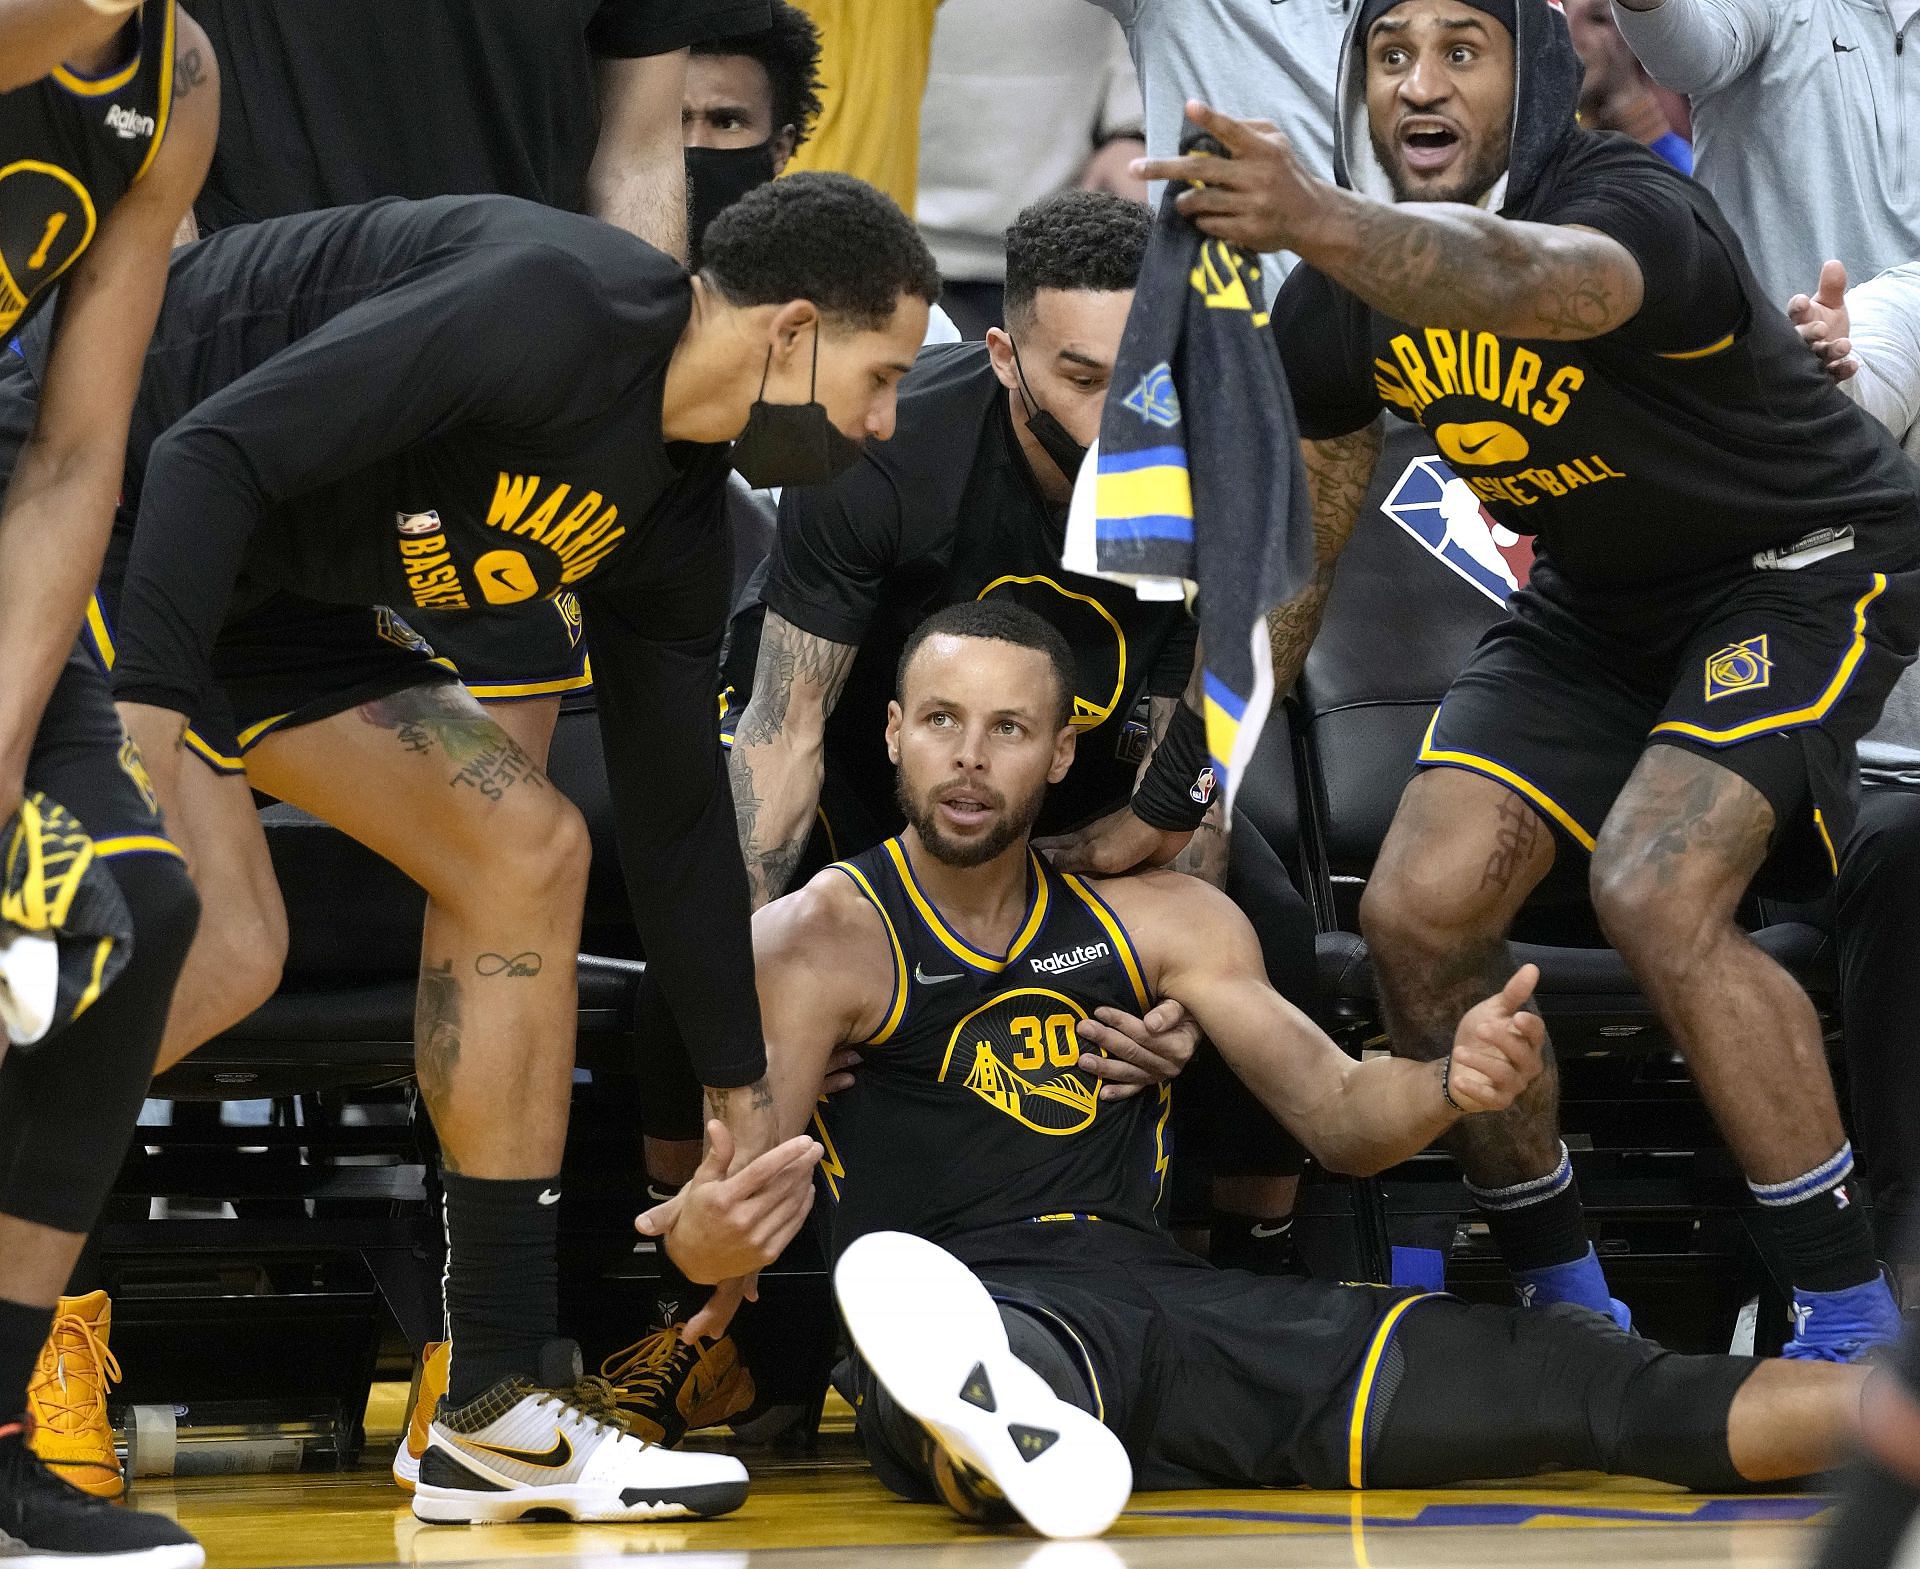 Stephen Curry #30 of the Golden State Warriors falls down in front of his bench after making a three-point shot against the Portland Trail Blazers during the second quarter at Chase Center on December 08, 2021 in San Francisco, California.